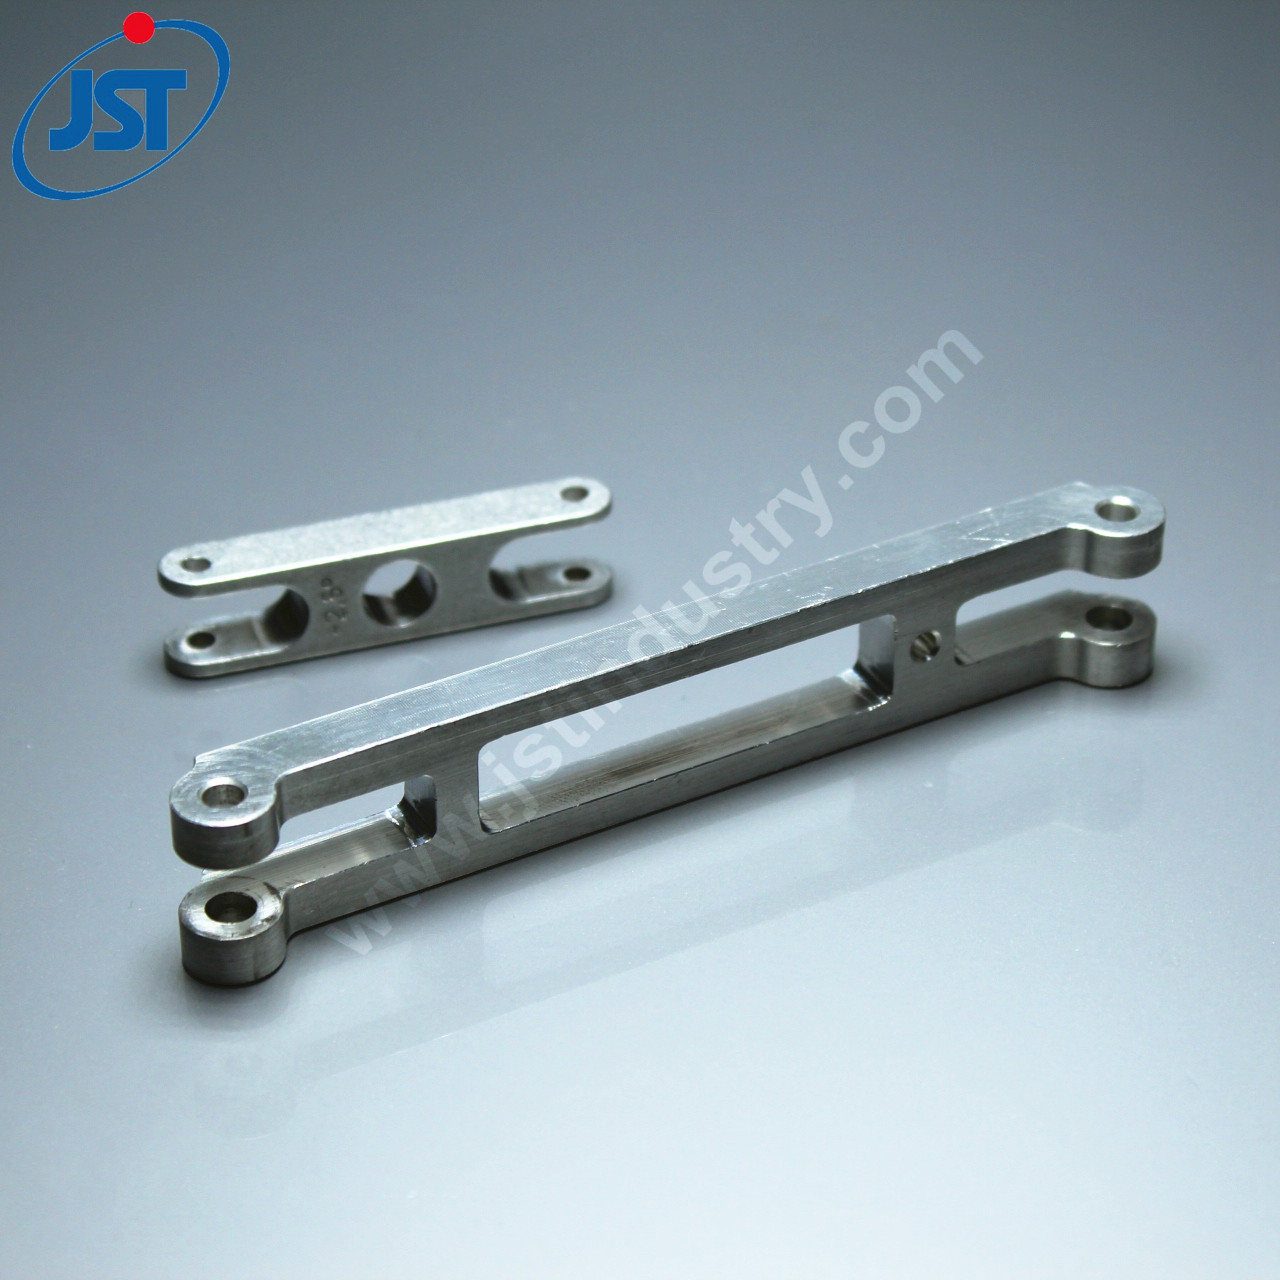 How to use the precision cnc machining parts?